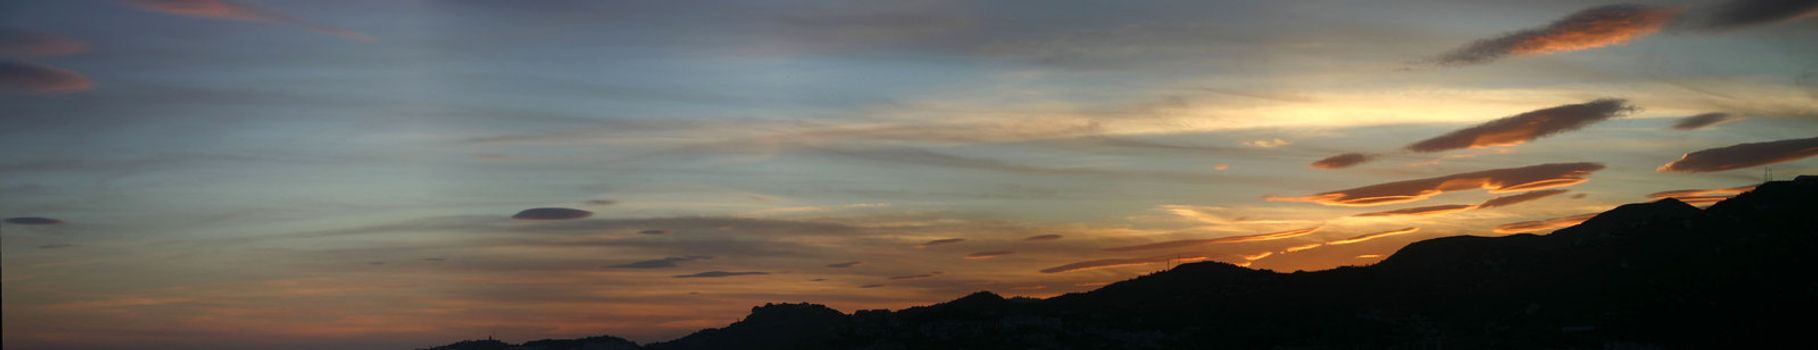 A fleet of lenticular clouds invading from the mountains at sunset